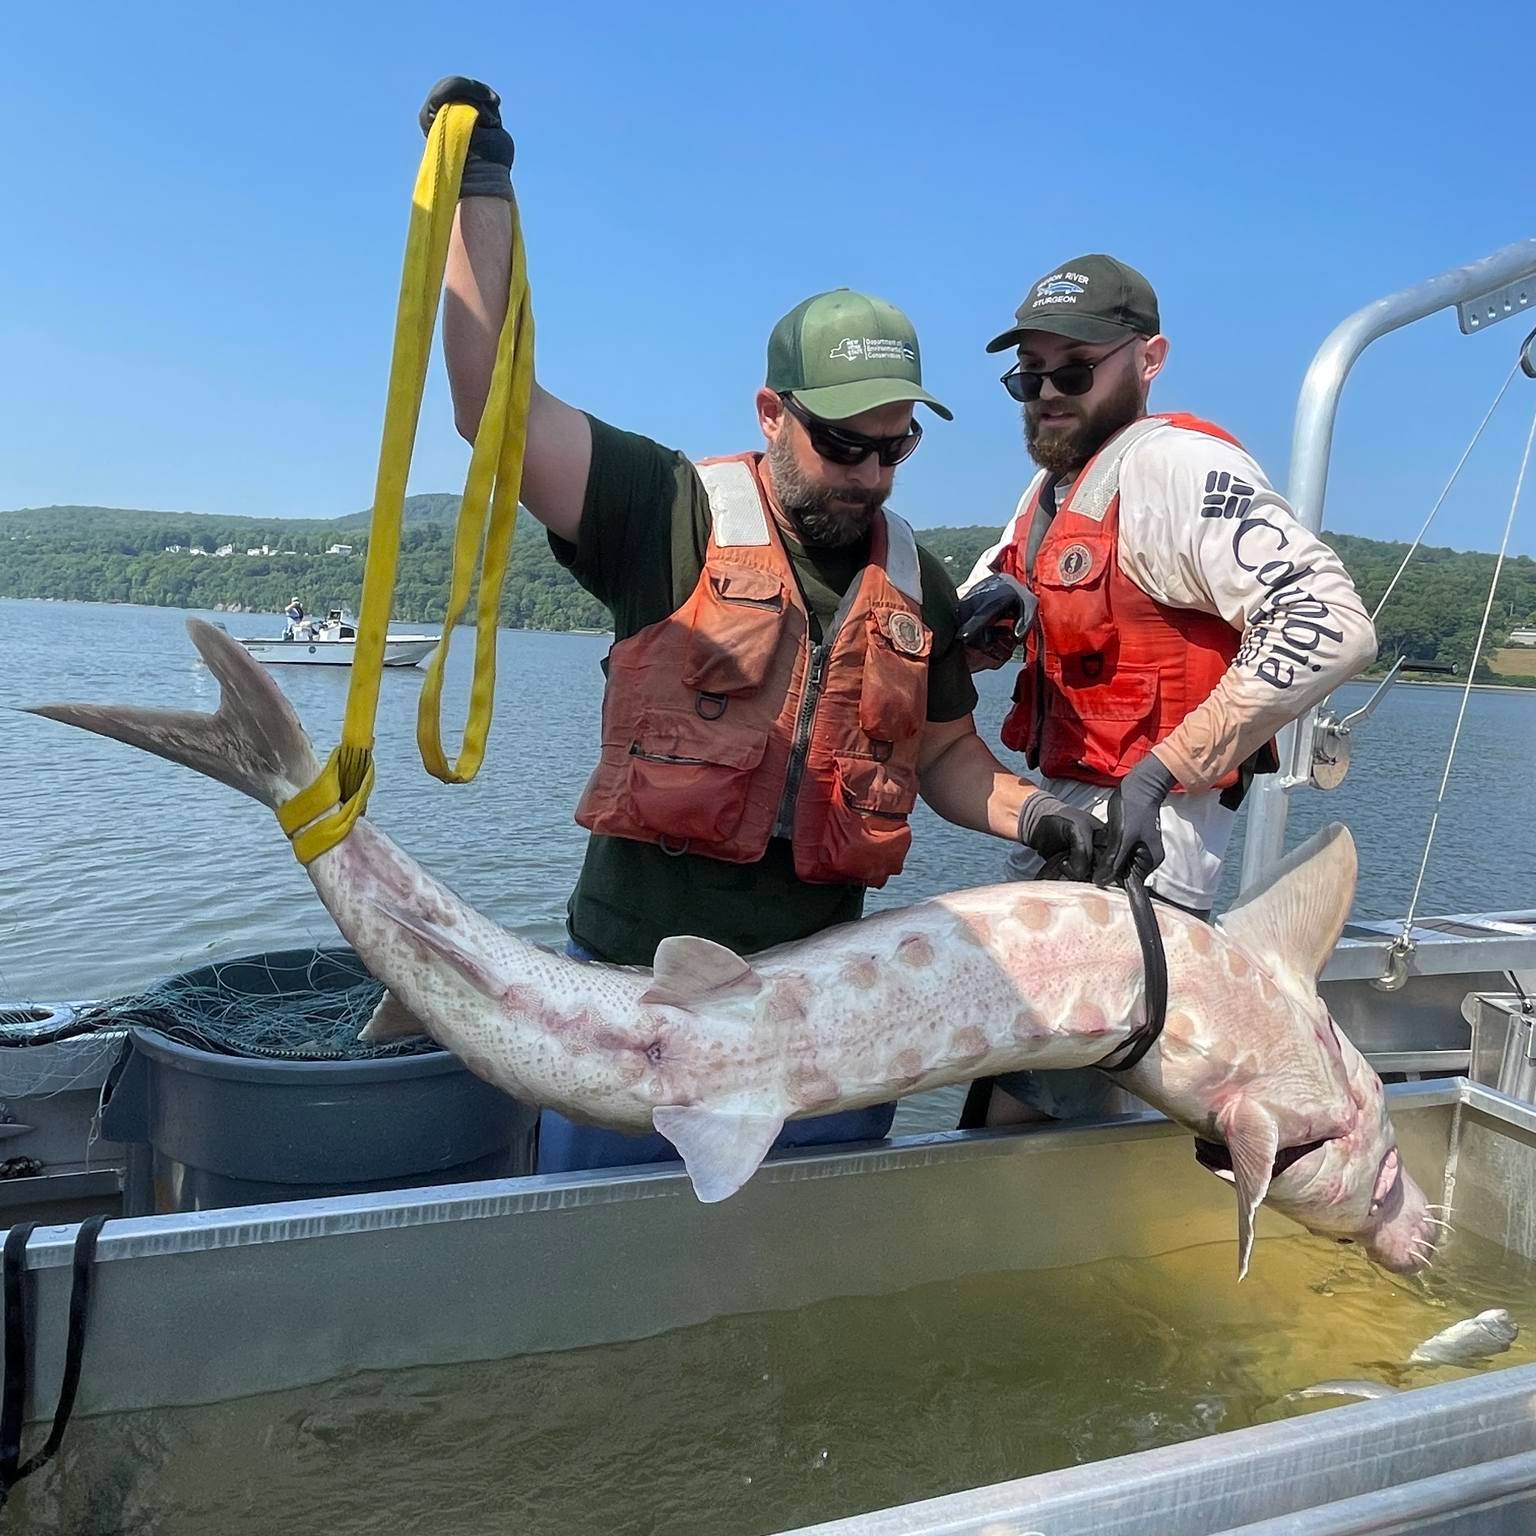 An Atlantic sturgeon being handled by NYC.